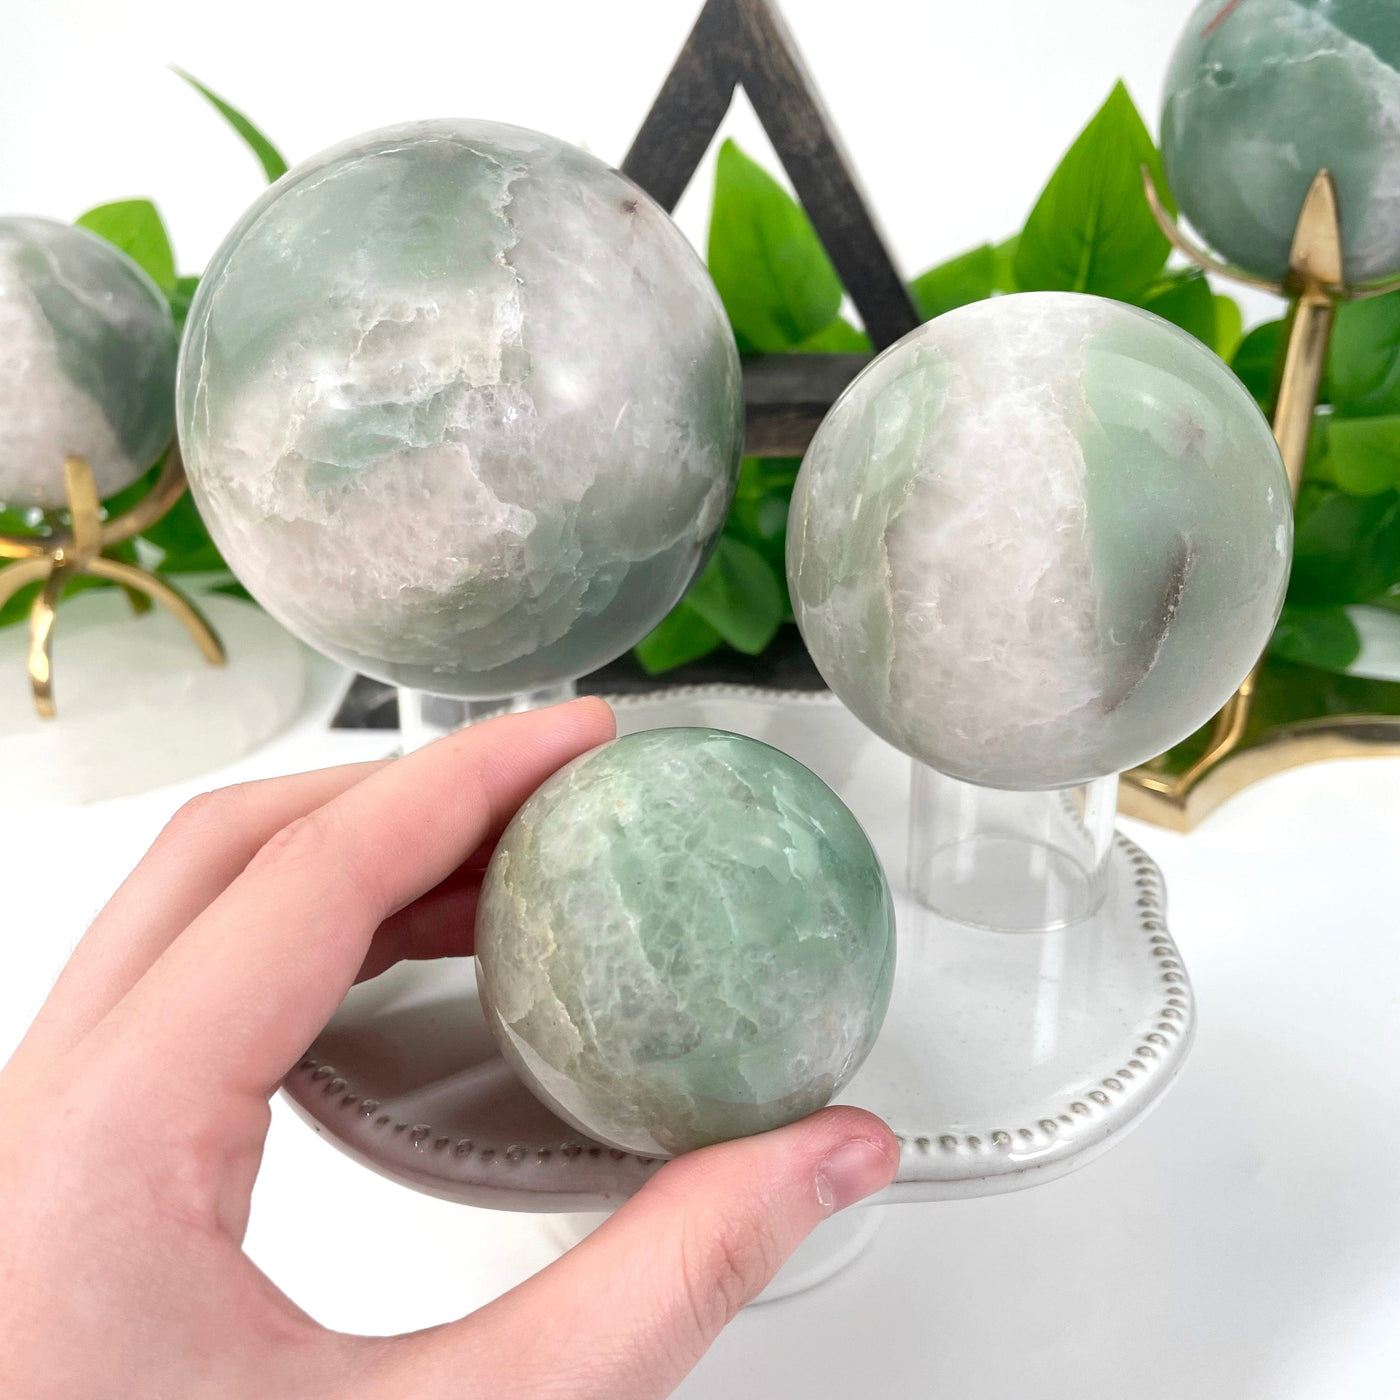 three different green and white quartz sphere weights on display for size comparison with one in hand for size reference